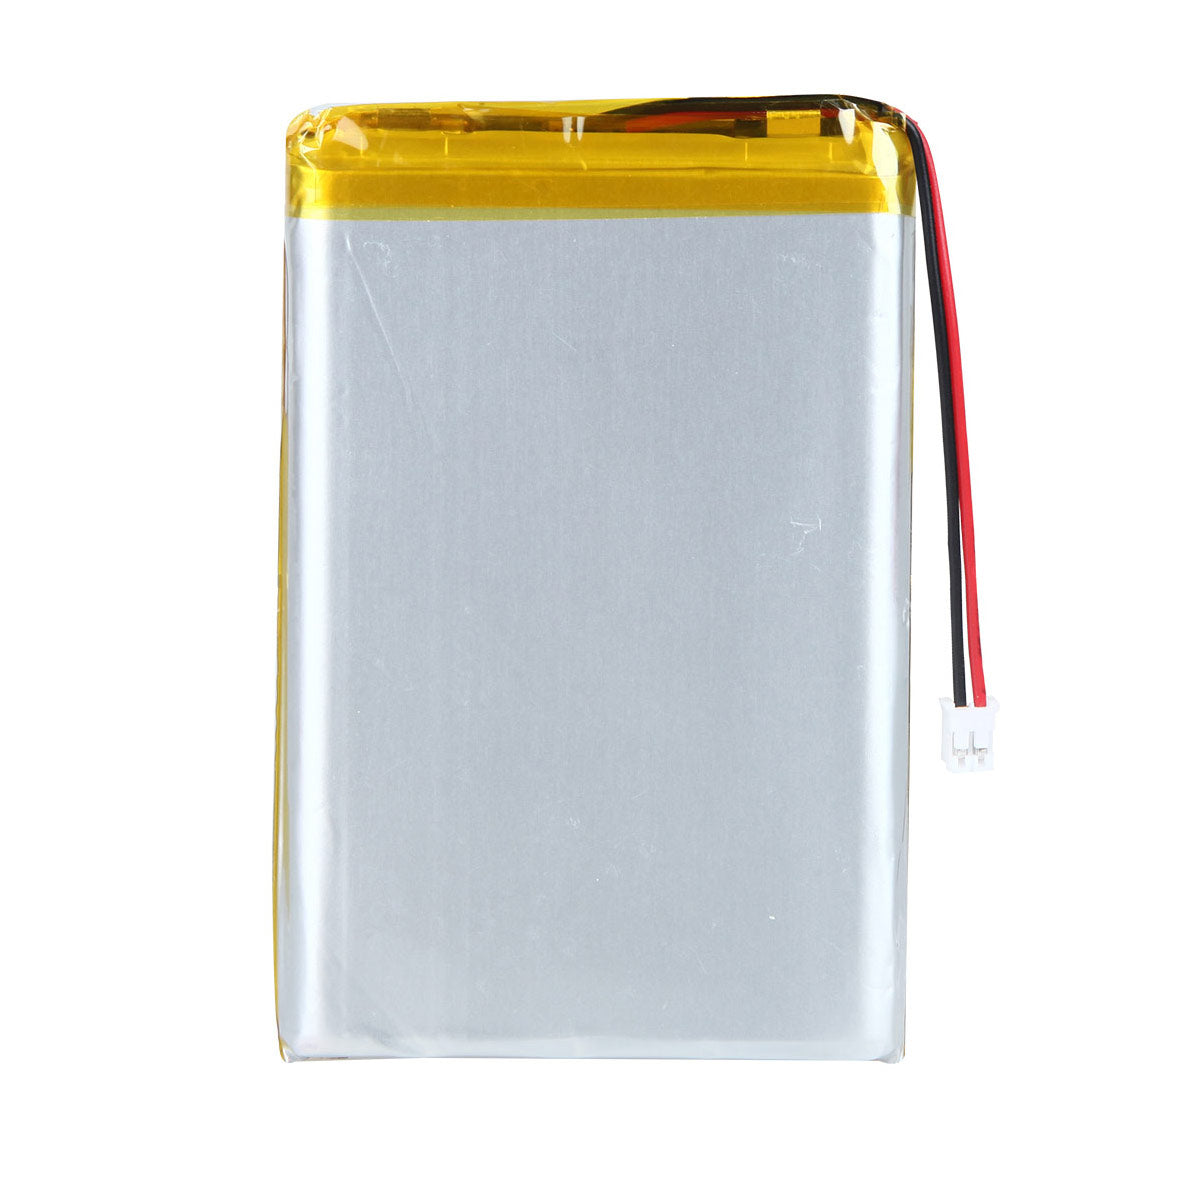 3.7V 5000mAh 855887 Rechargeable Lithium Polymer Battery